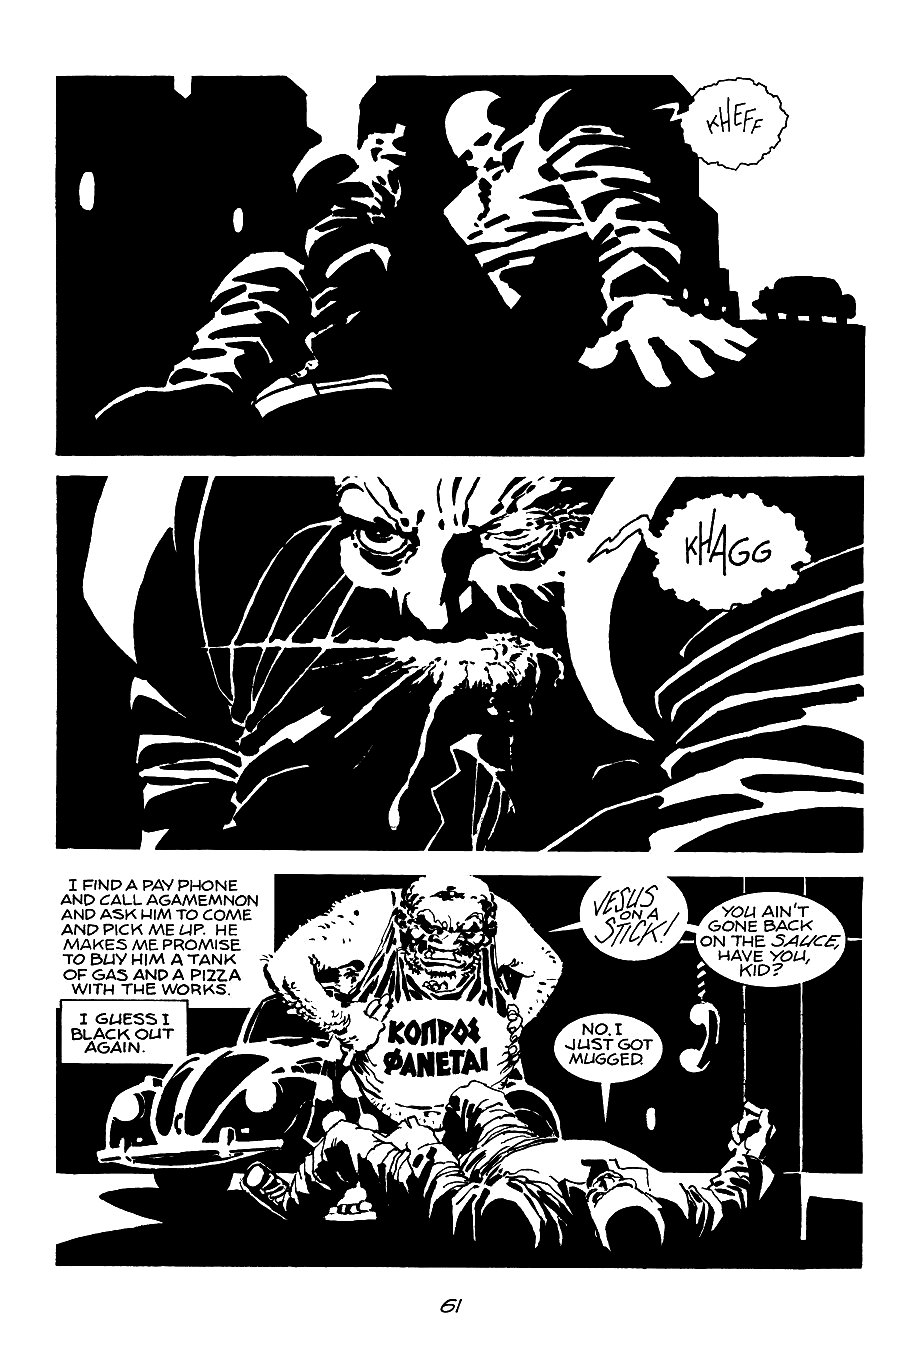 page 61 of sin city 2 the hard goodbye